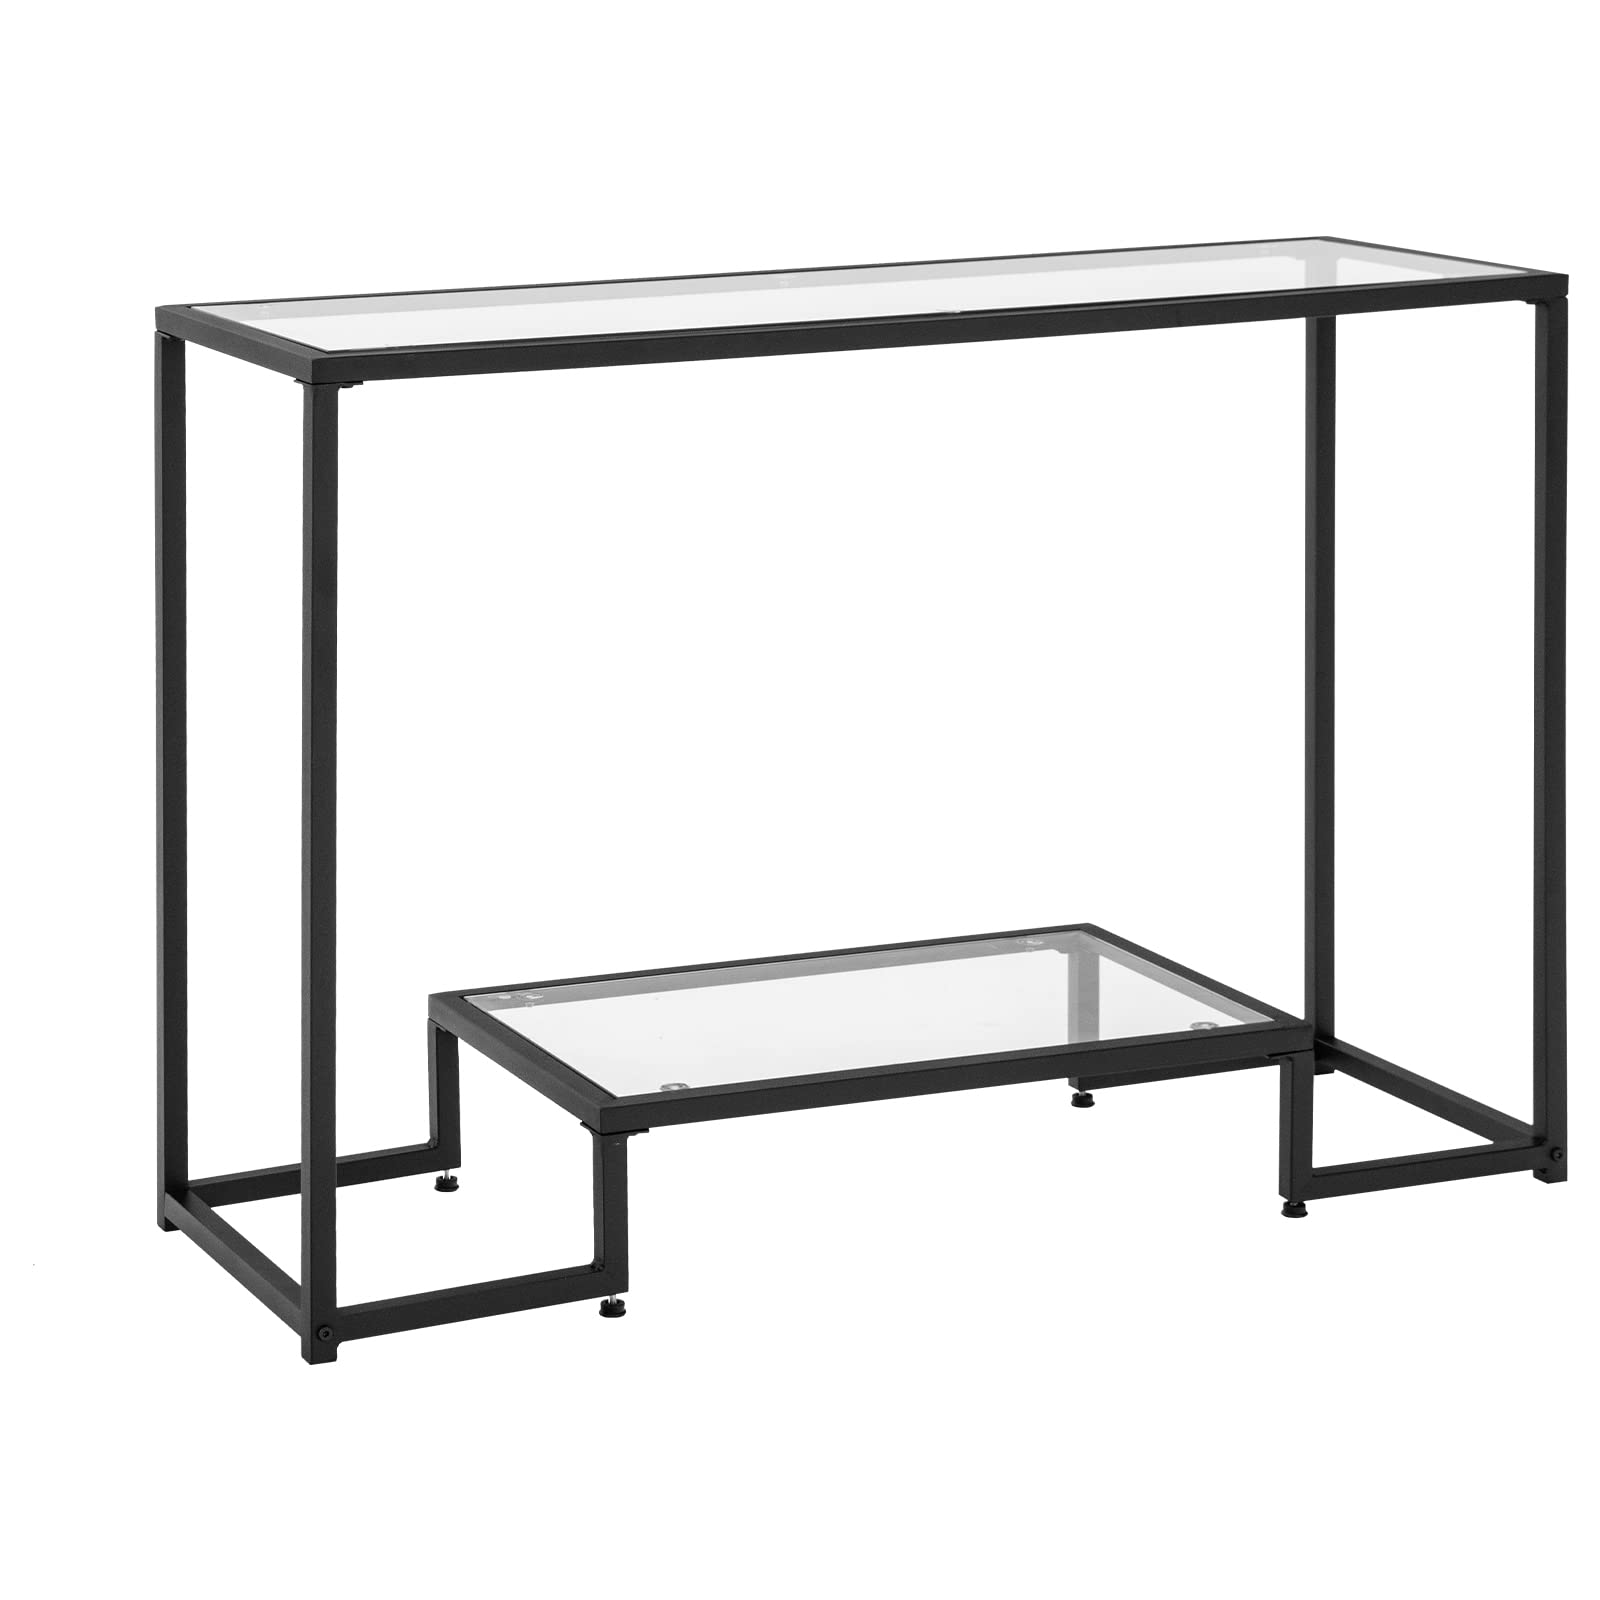 Giantex Narrow Console Entryway Table - Modern Sofa Side Table with Storage Lower Shelf, Black